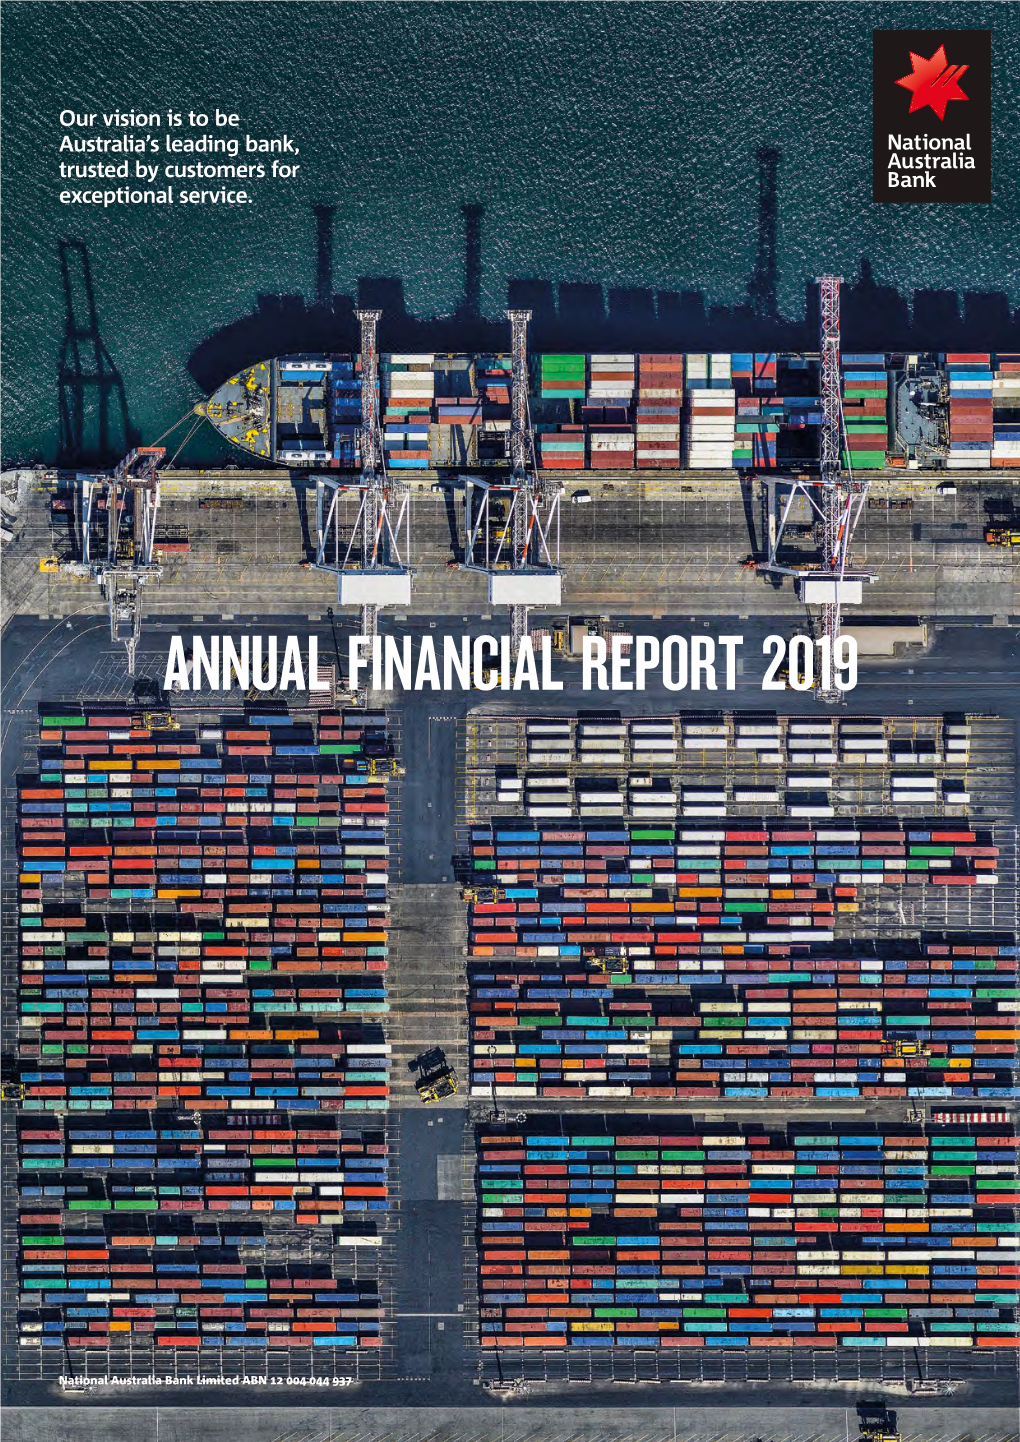 Annual Financial Report 2019